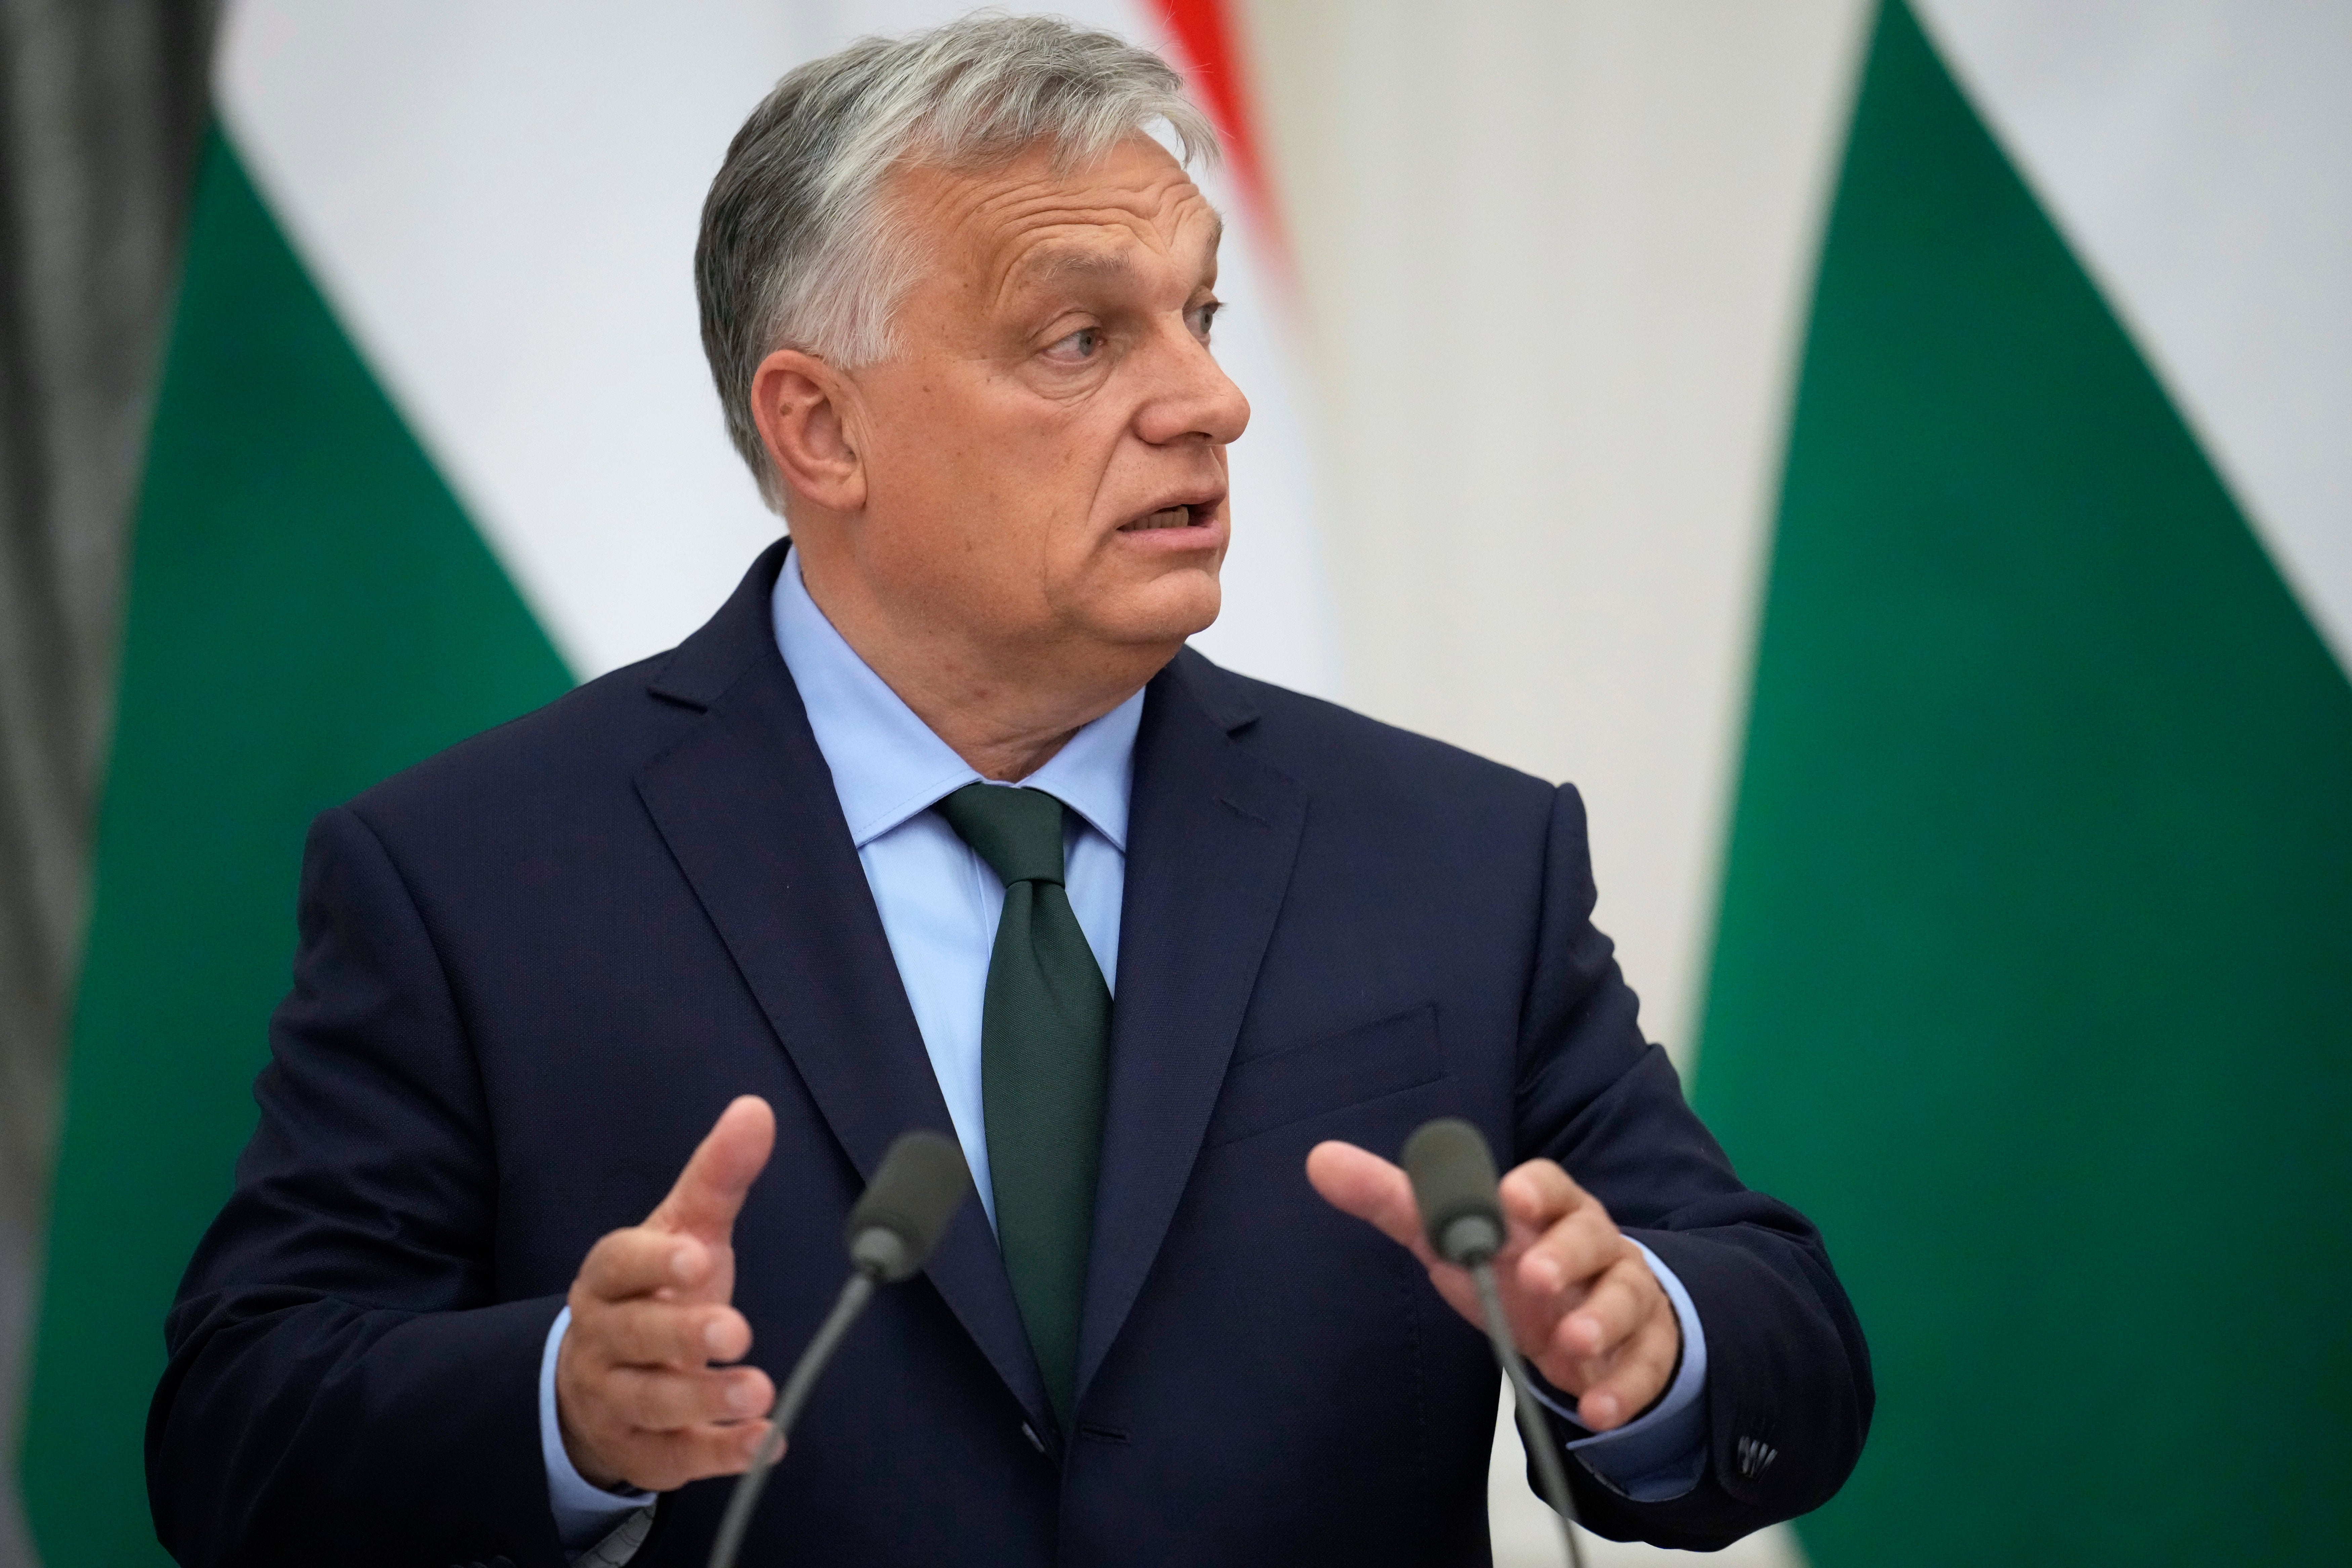 Mr Orban will attend the NATO summit in Washington this week after meeting with Russian and Chinese leaders.